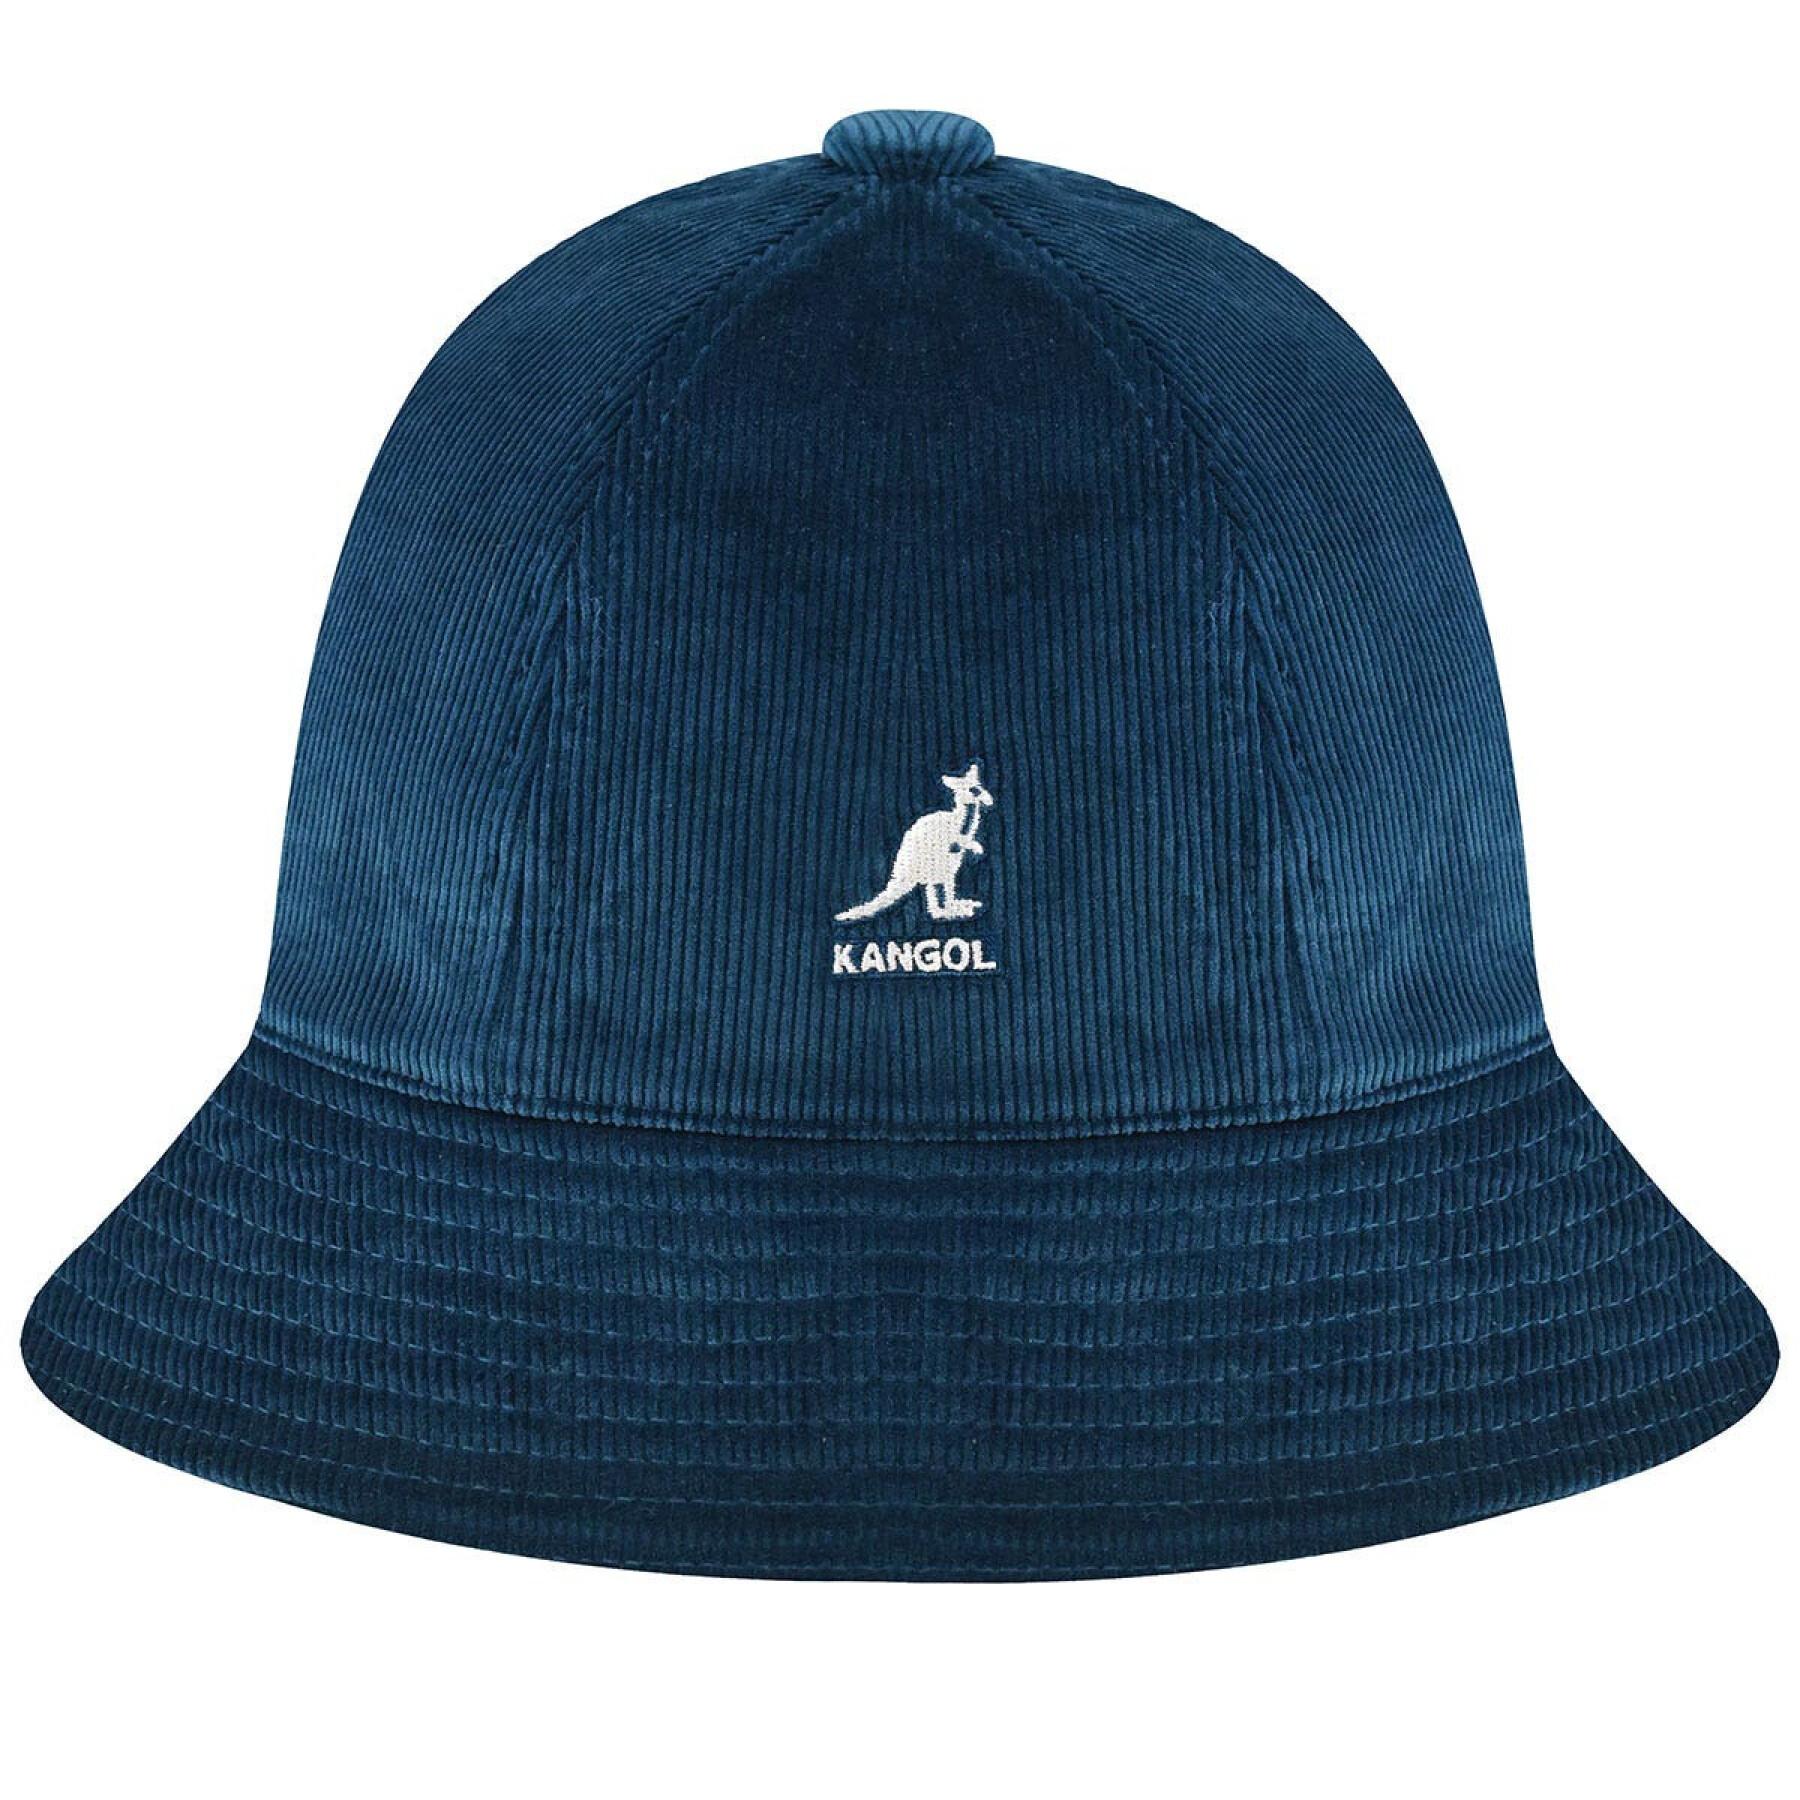 CORD CASUAL – The Official Kangol® Store